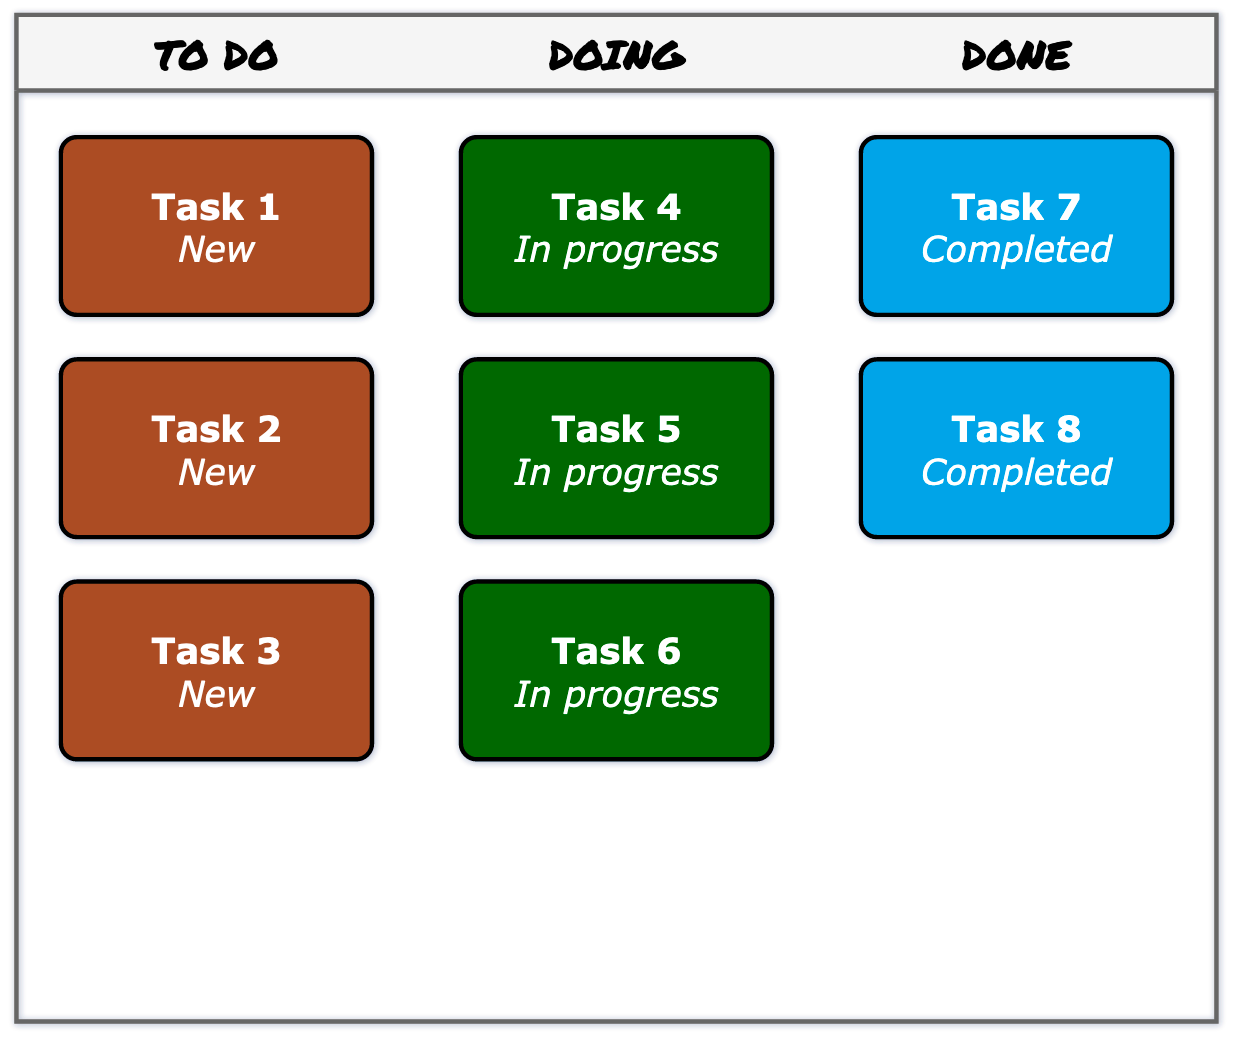 The kanban template in draw.io automatically updates colours and labels when you move tasks to another column